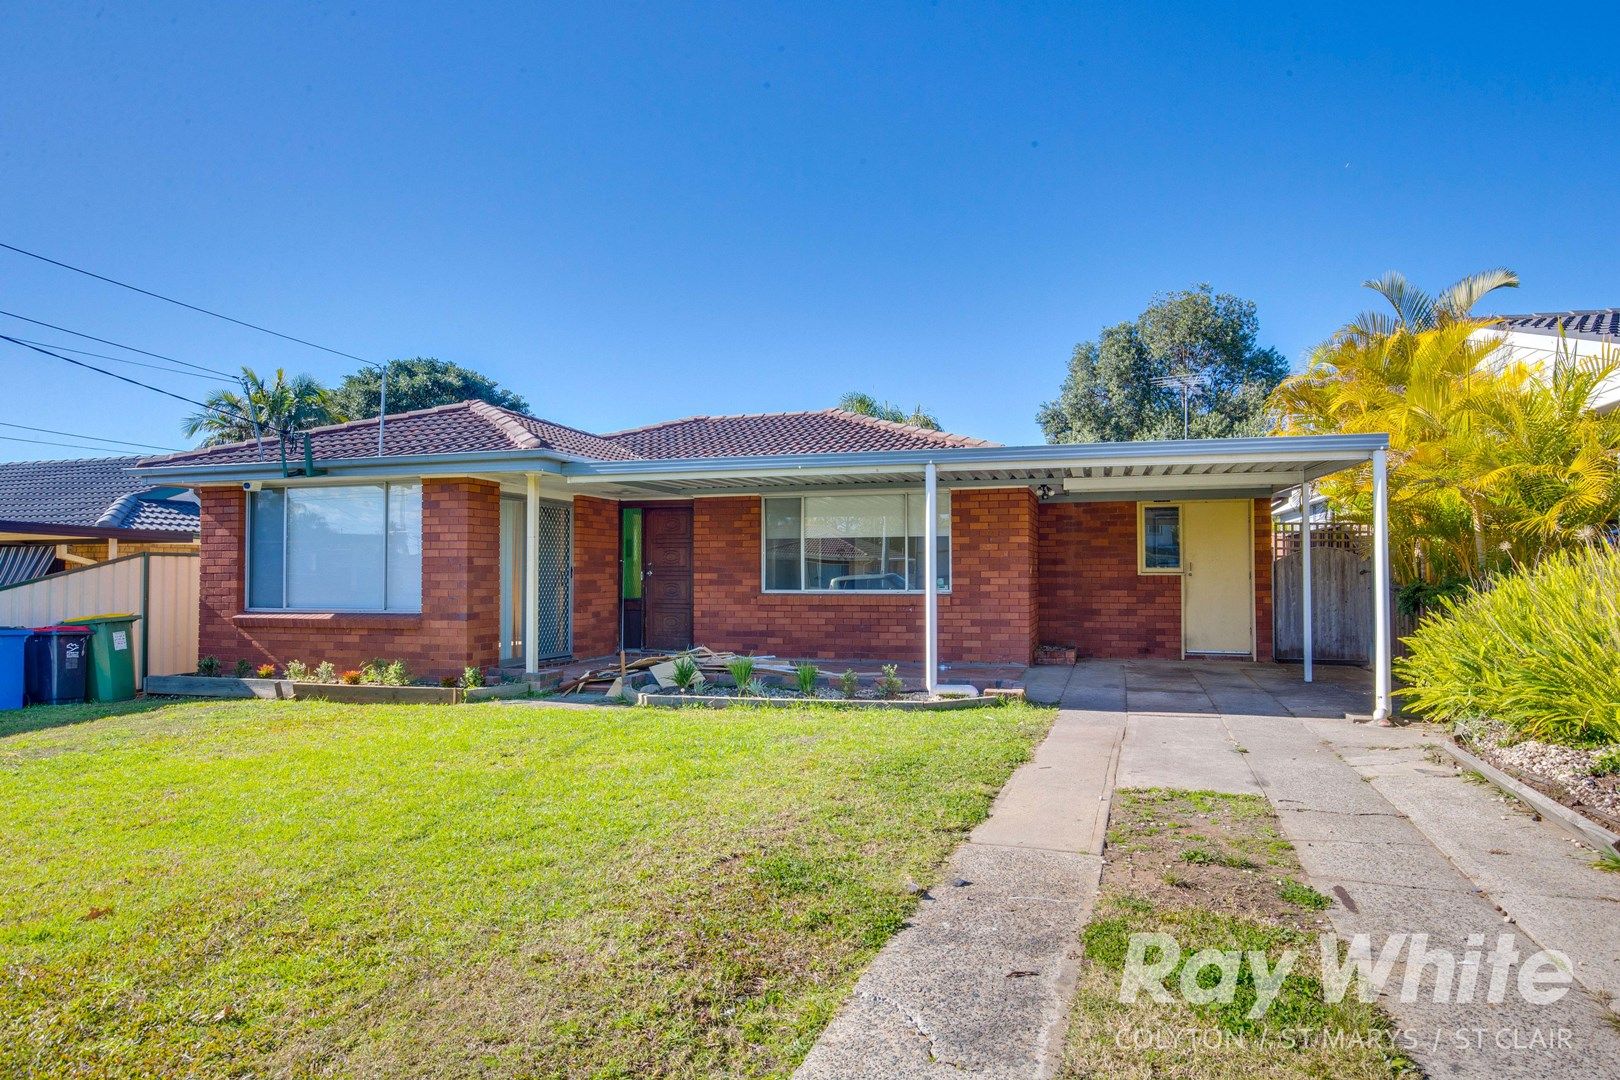 12 Kennelly st, Colyton NSW 2760, Image 0